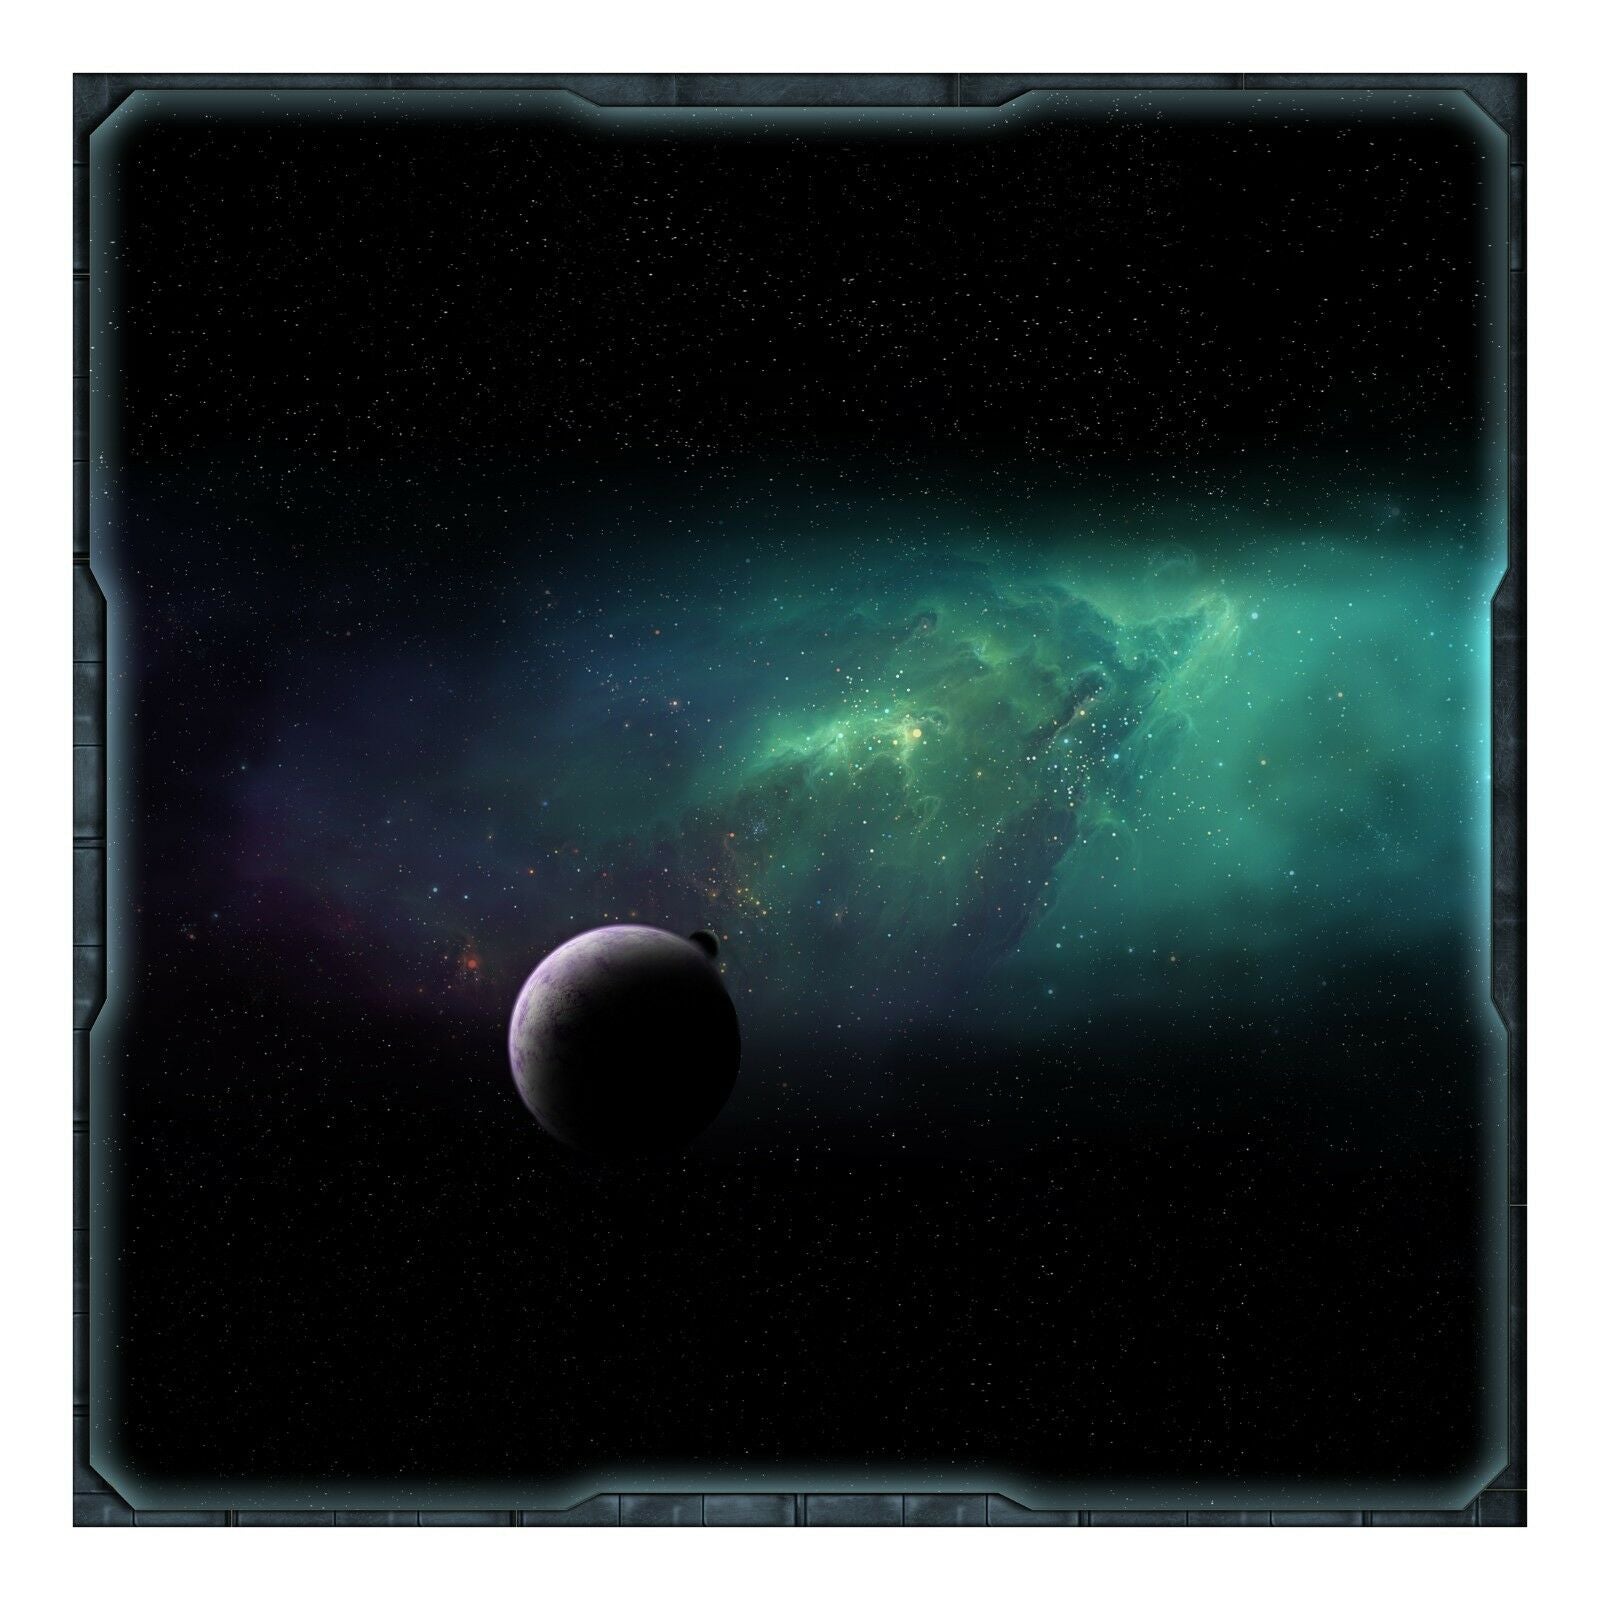 Into the Darkness - 36" x 36" Battle Mat for X-Wing and Table Miniature Space Games